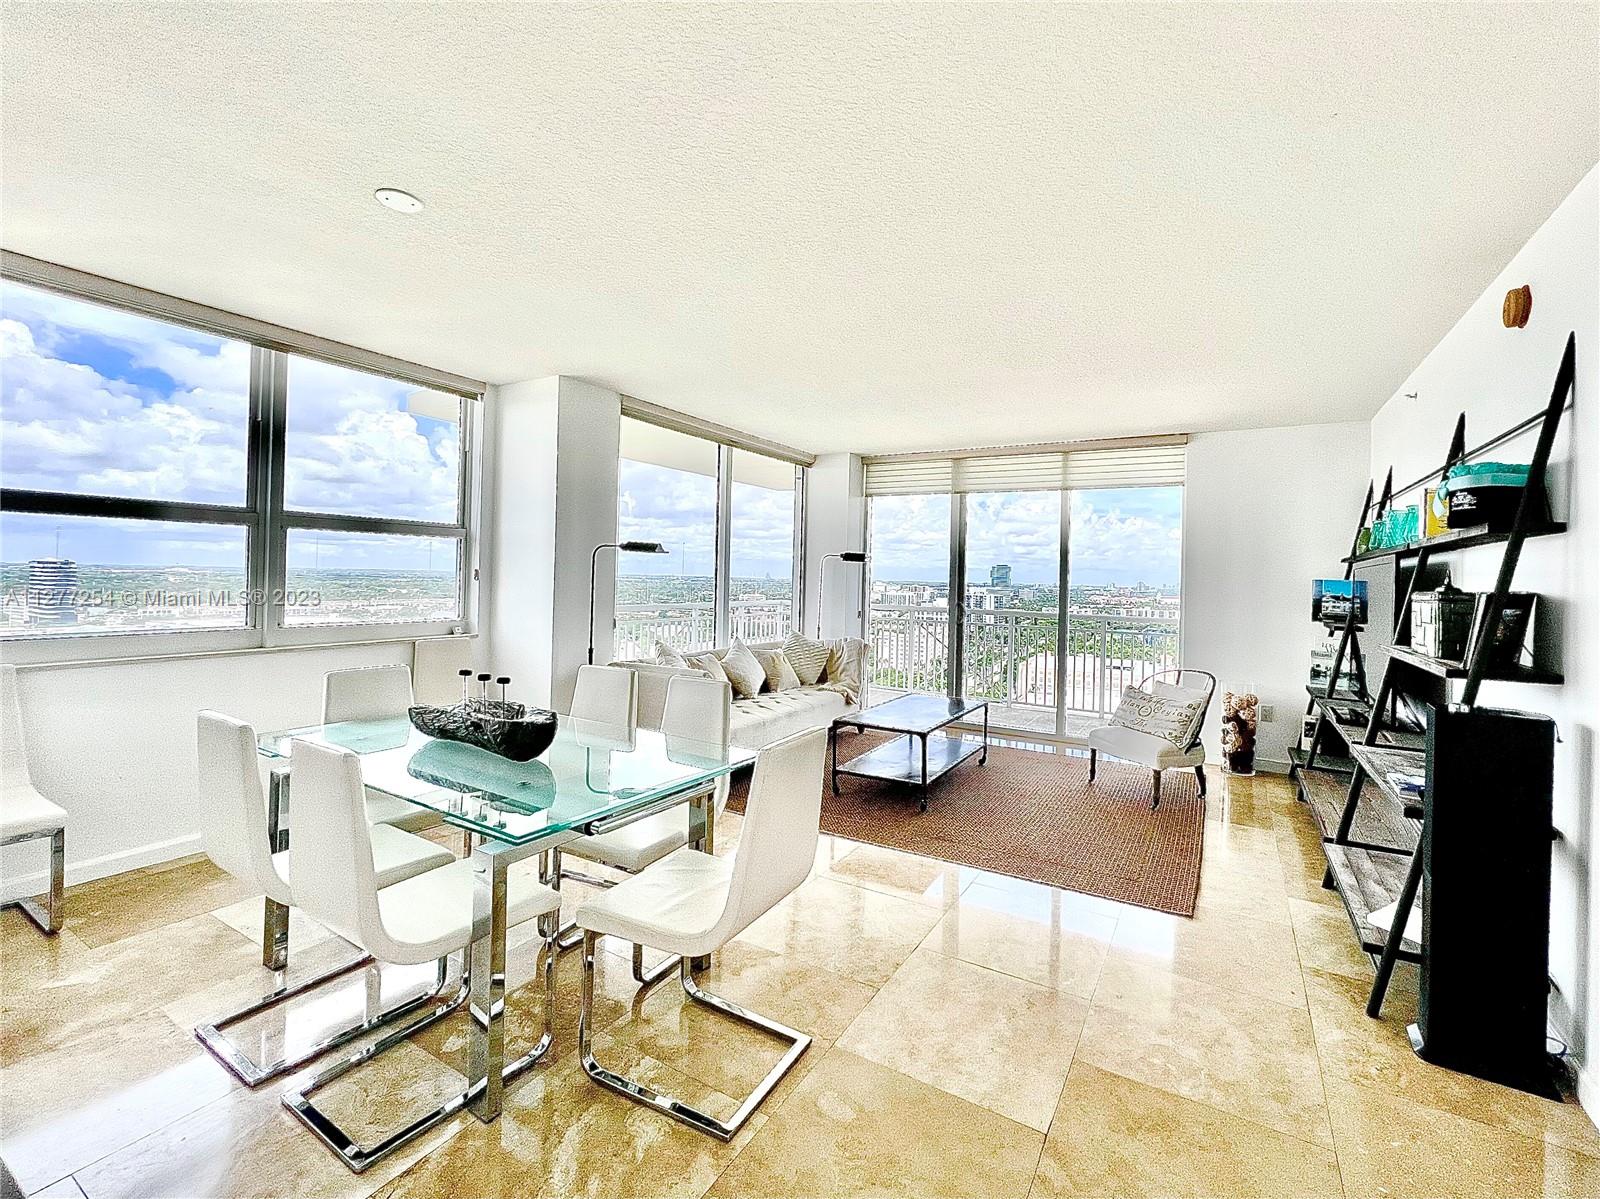 Photo 1 of Turnberry On The Green Con Apt 2313 in Aventura - MLS A11277254